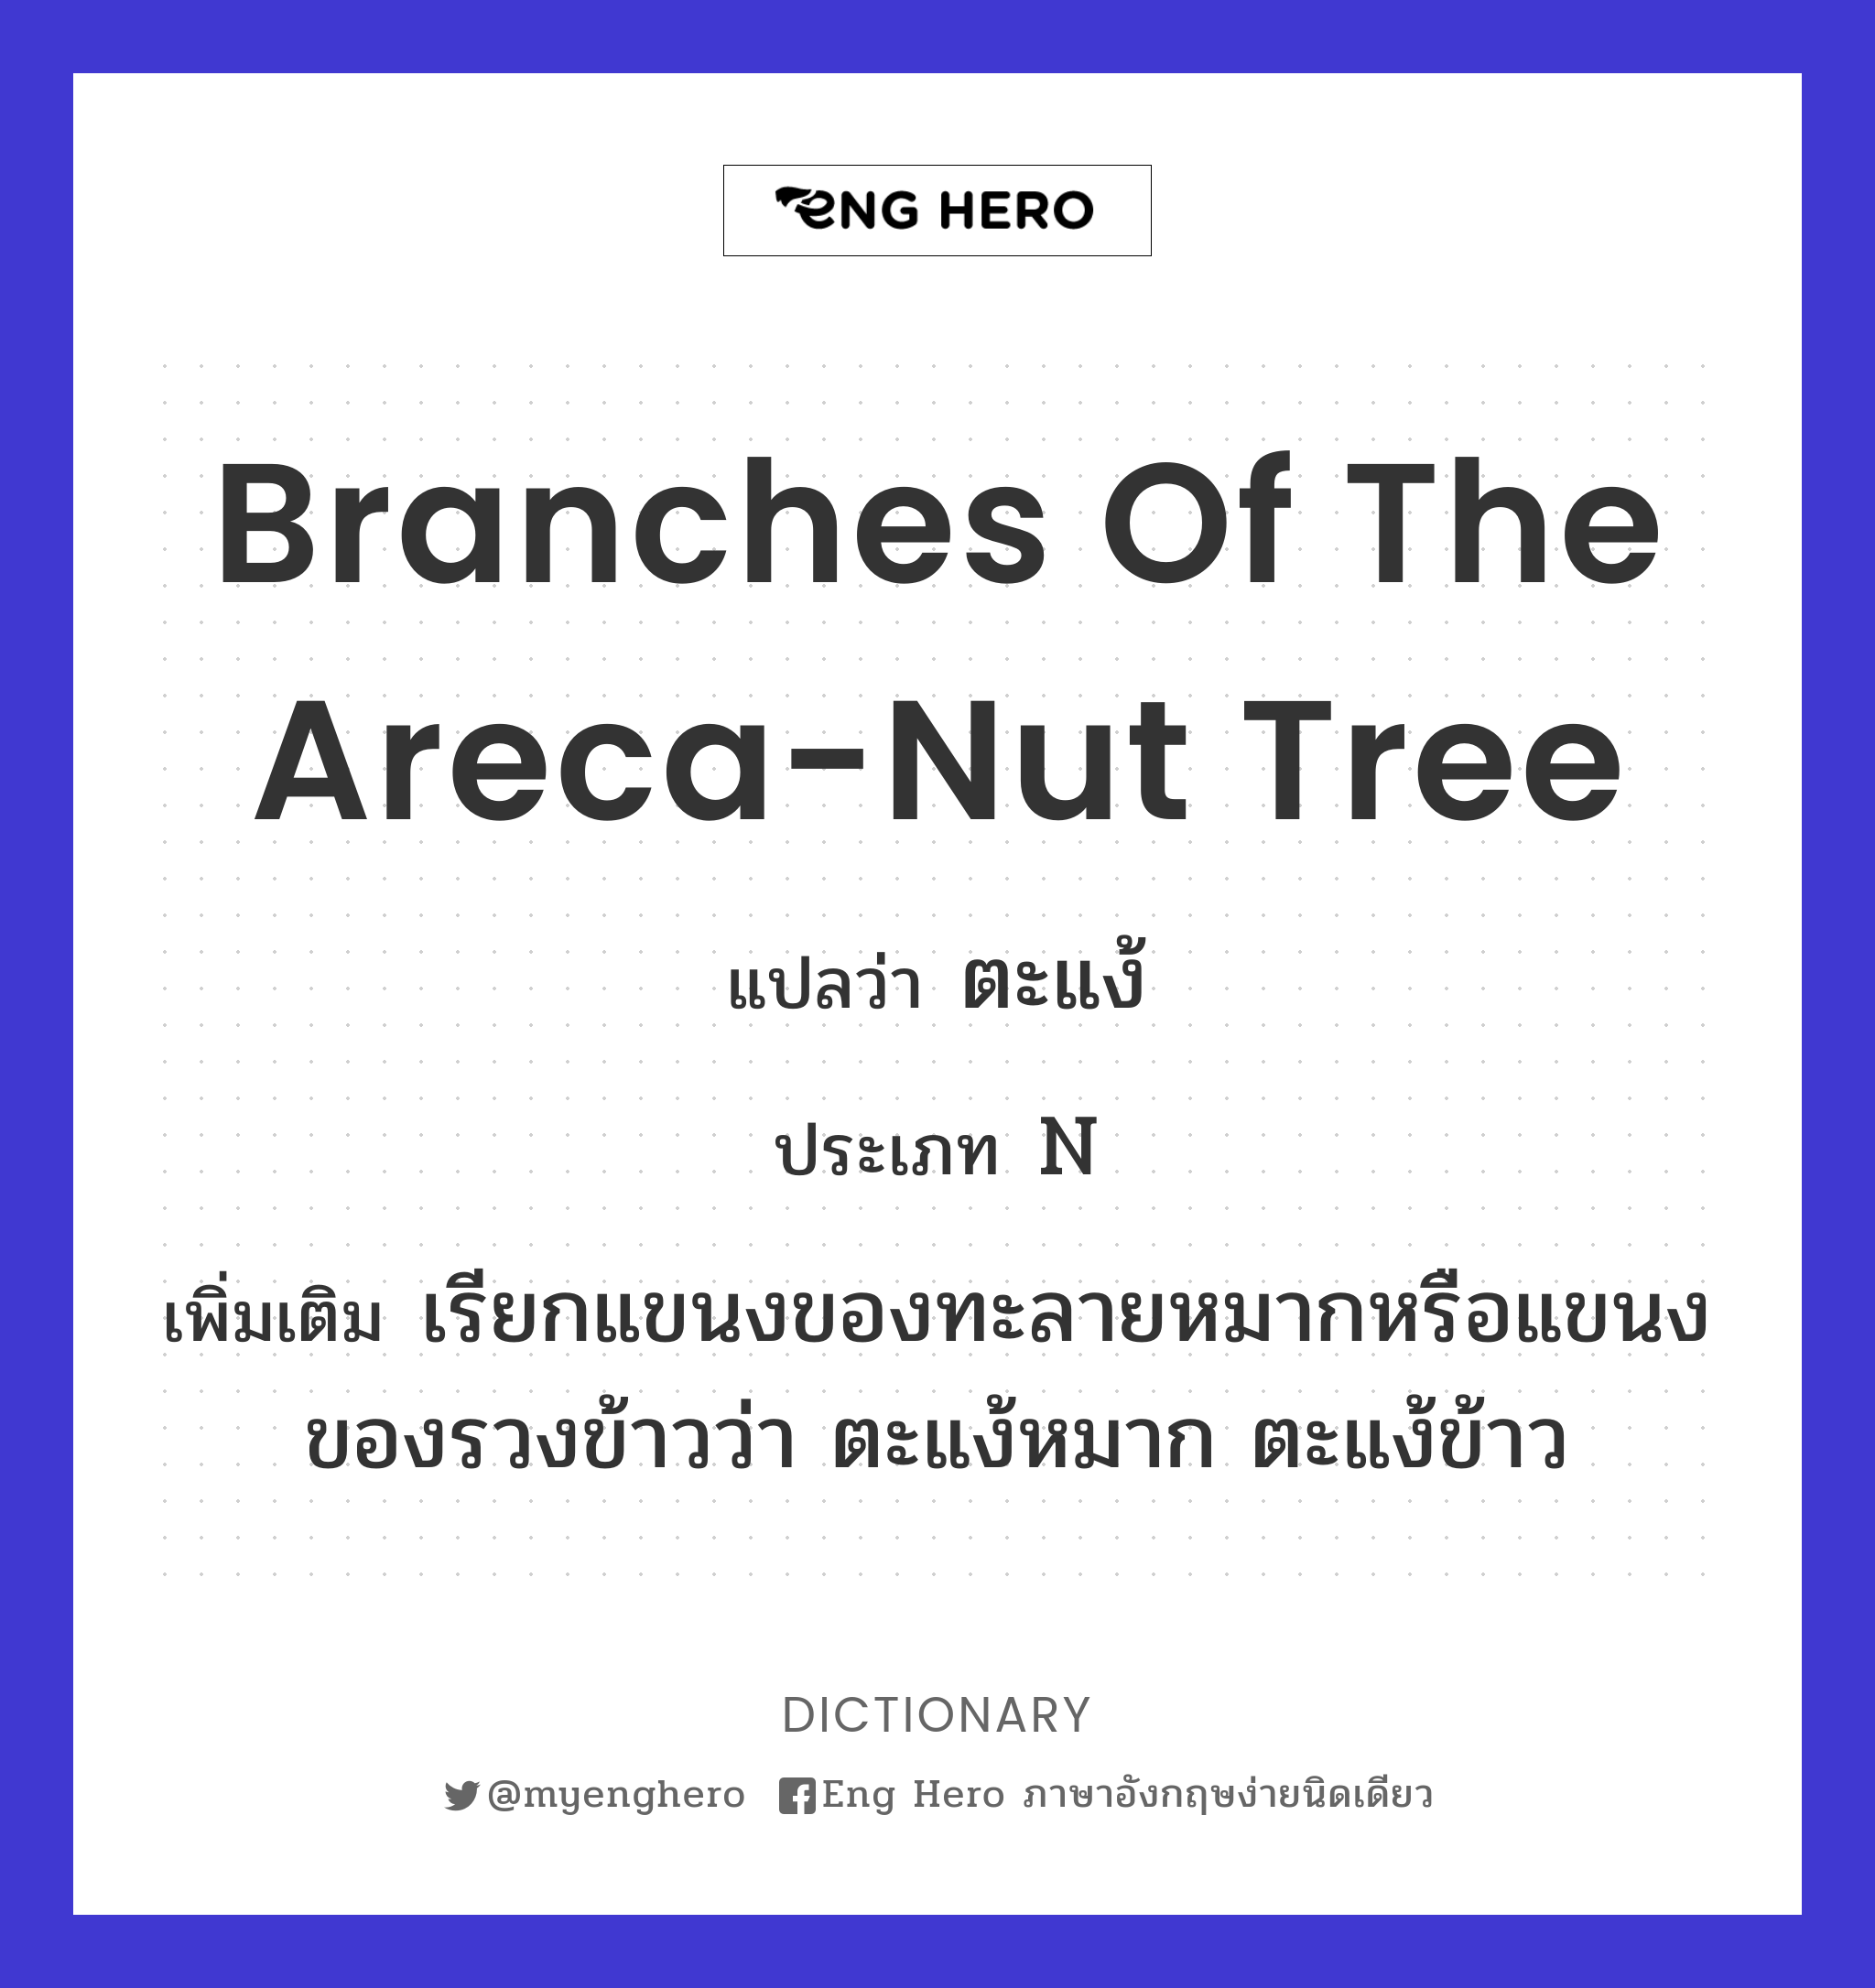 branches of the areca-nut tree